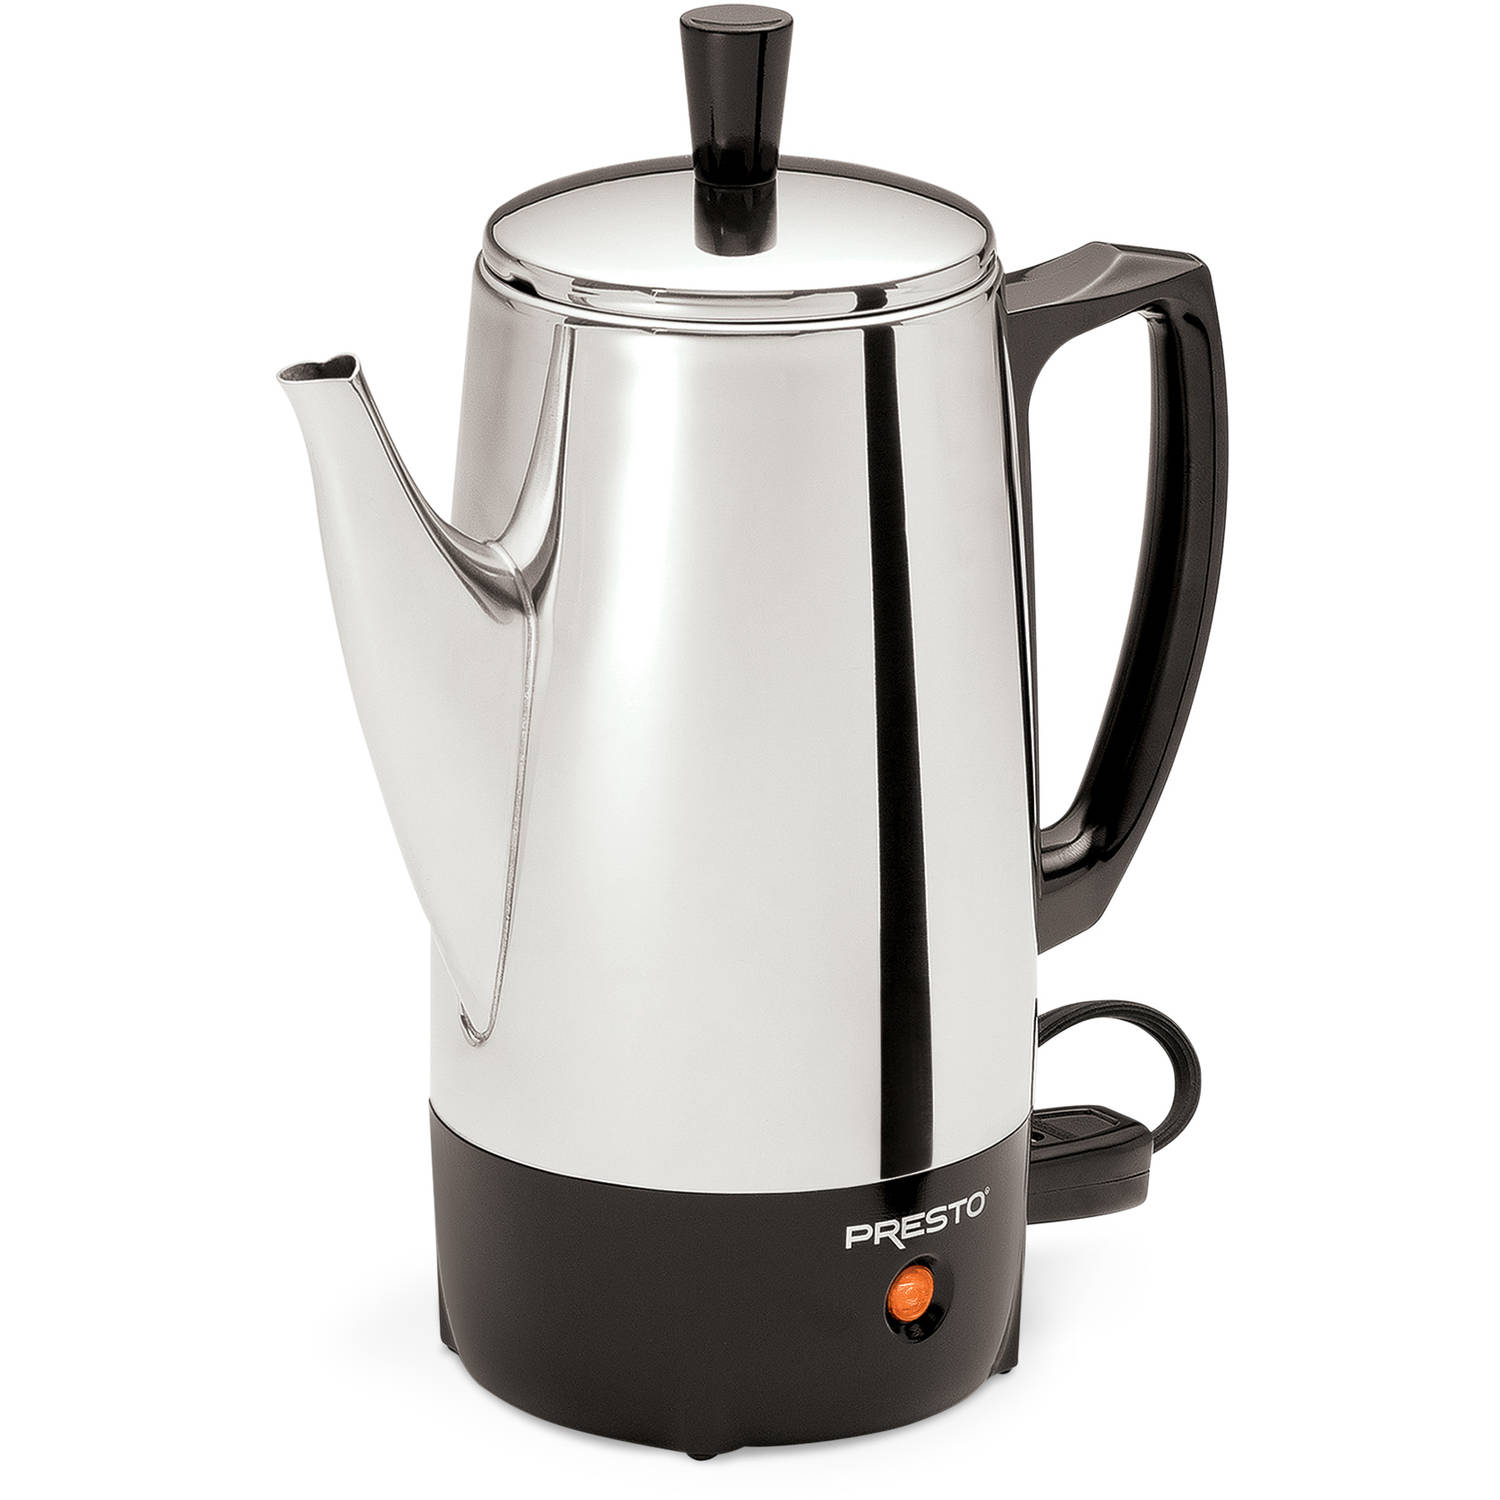 Presto® 6-Cup Capacity Stainless Steel Coffee Maker 02822 - image 2 of 10